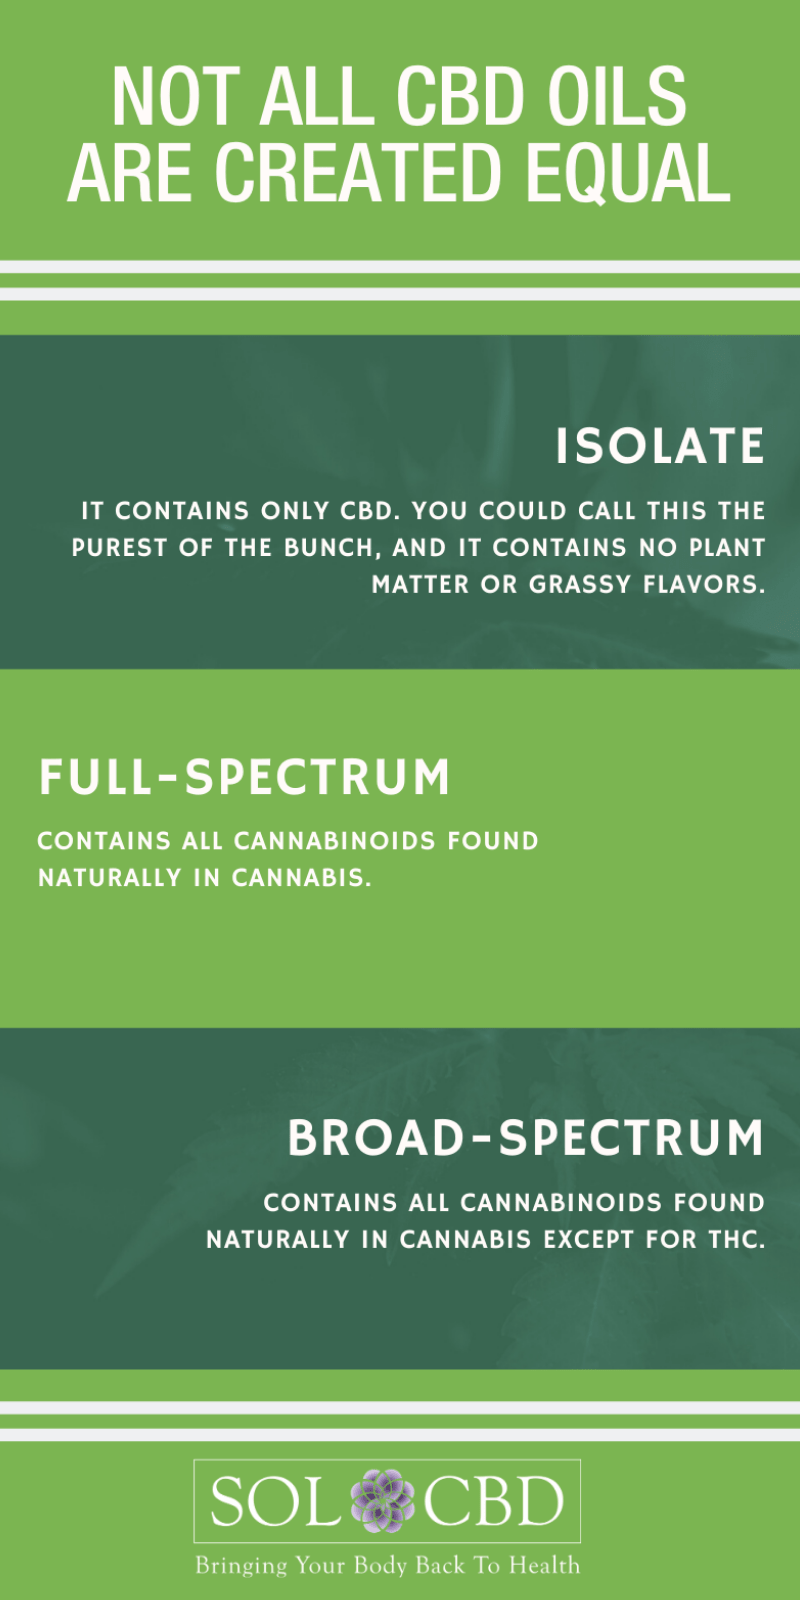 In the world of CBD, there are three main types of extracts: broad-spectrum, full-spectrum, and isolate.